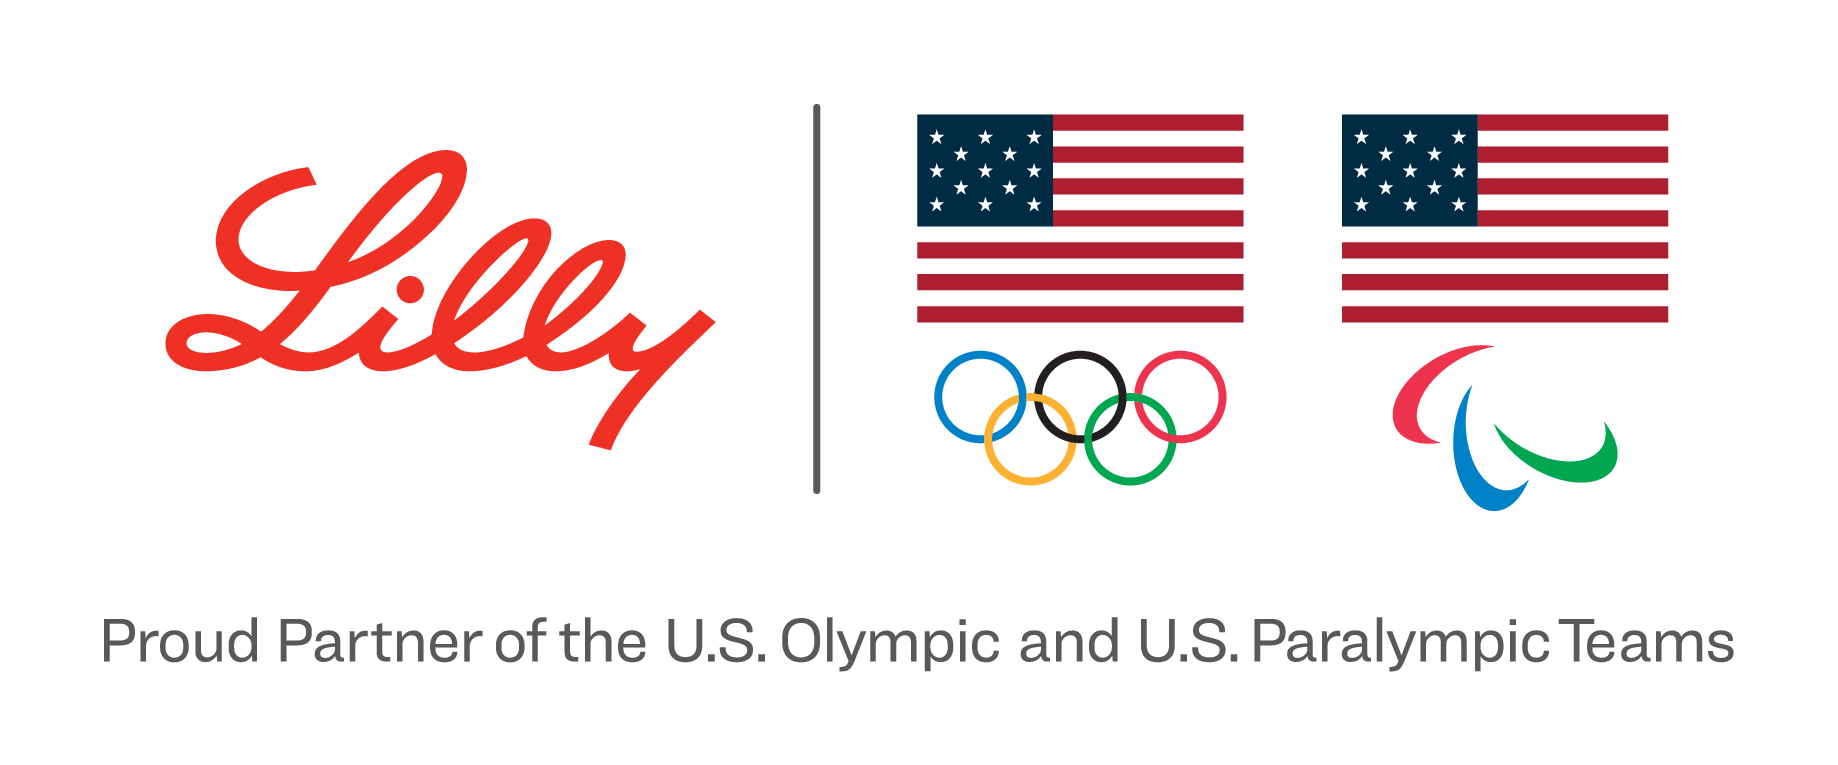 Proud Partner of the U.S. Olympic and U.S. Paralympic Teams